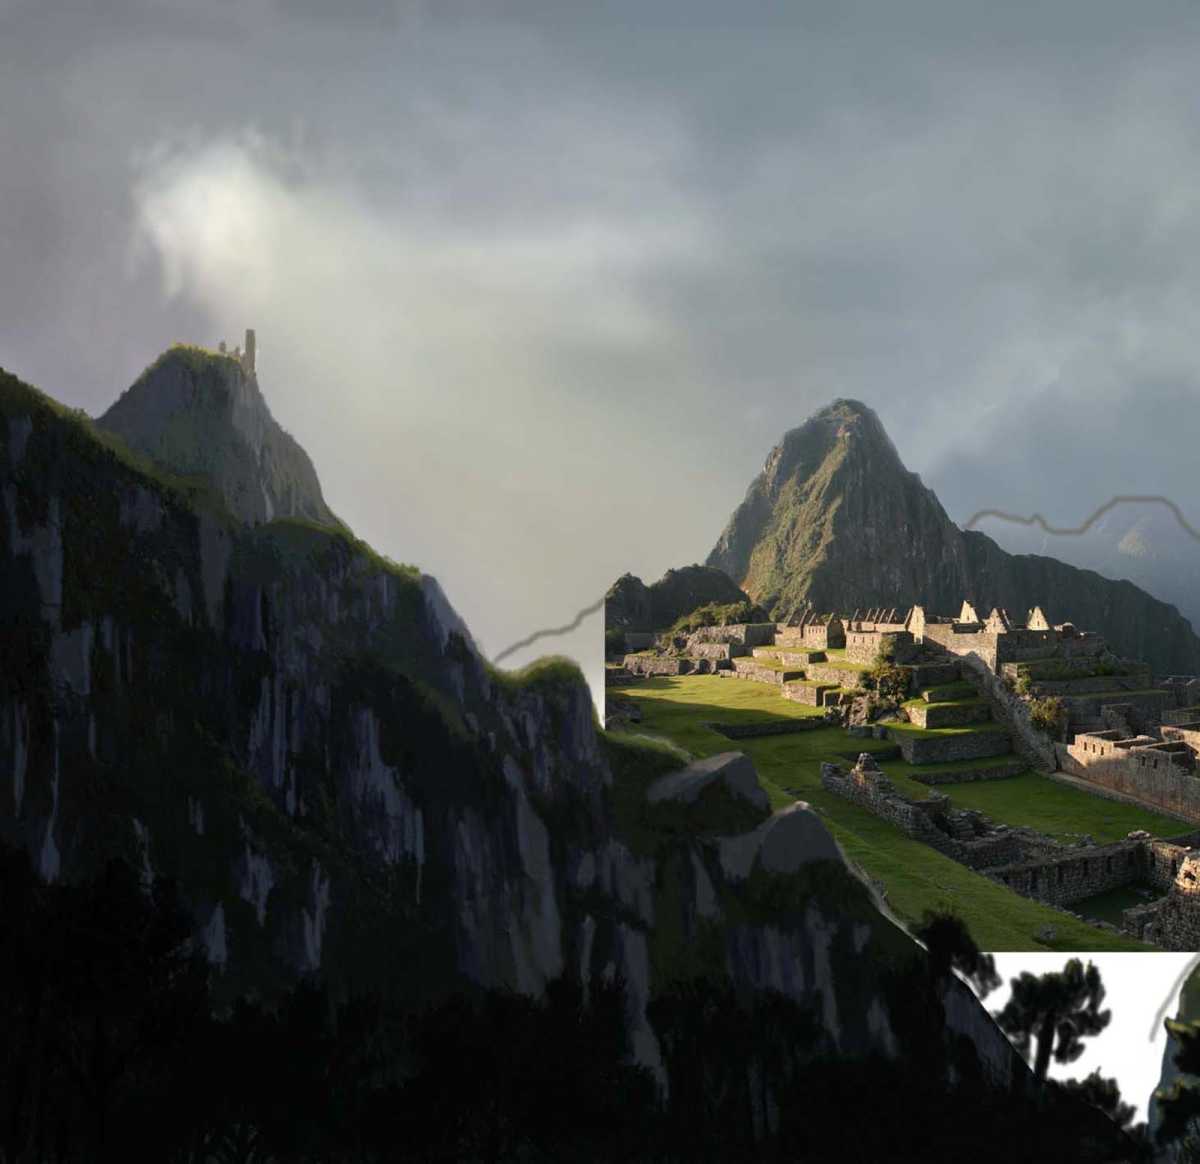 How to create a matte painting in Photoshop - step 7